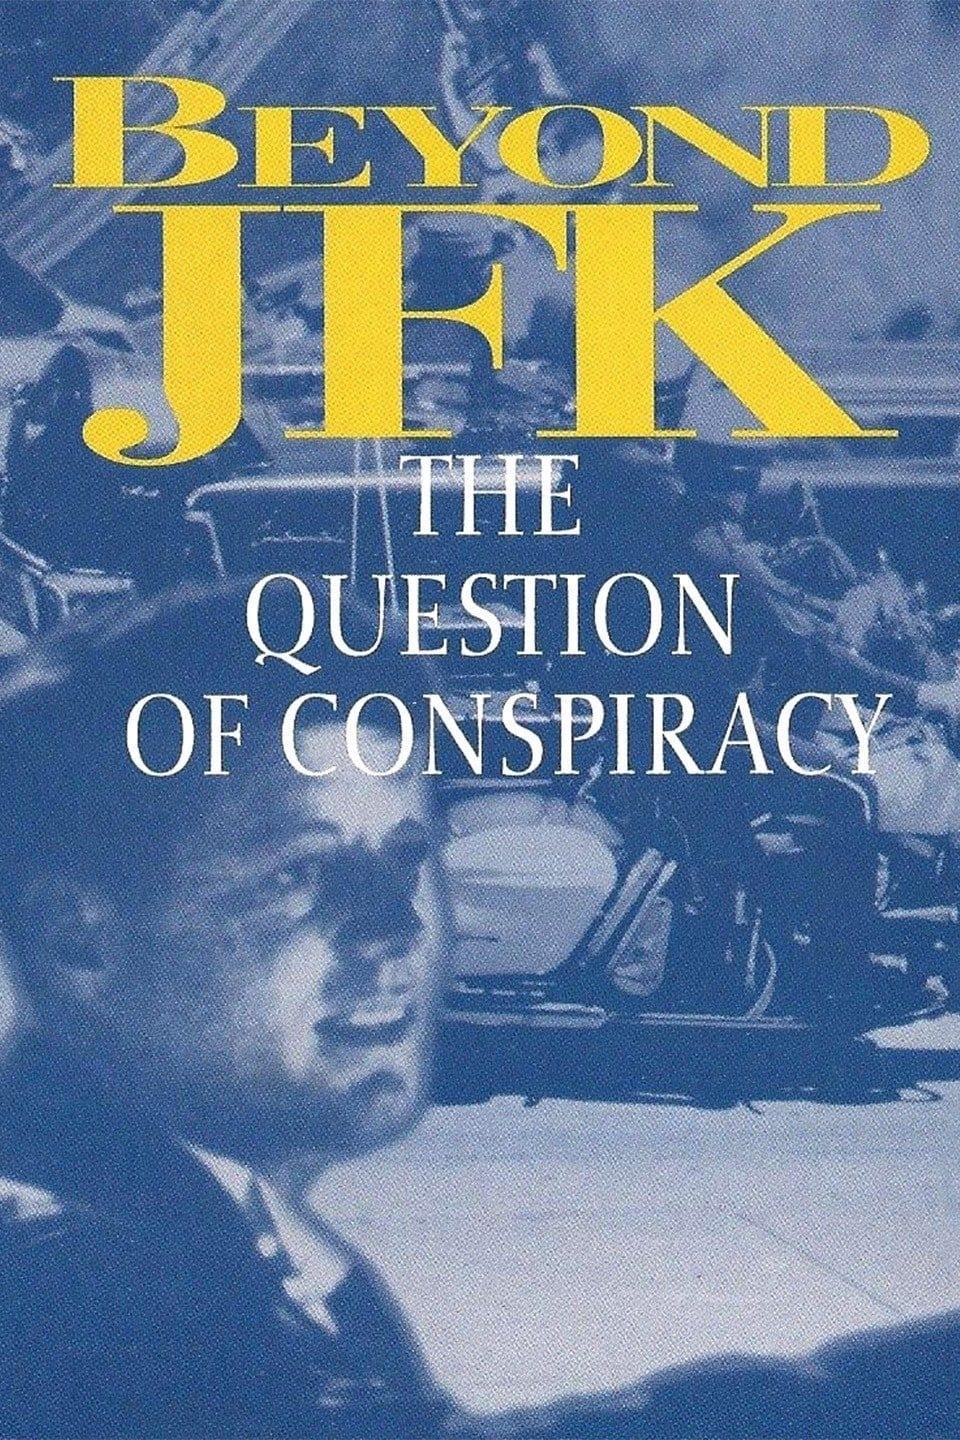 Beyond JFK: The Question of Conspiracy poster